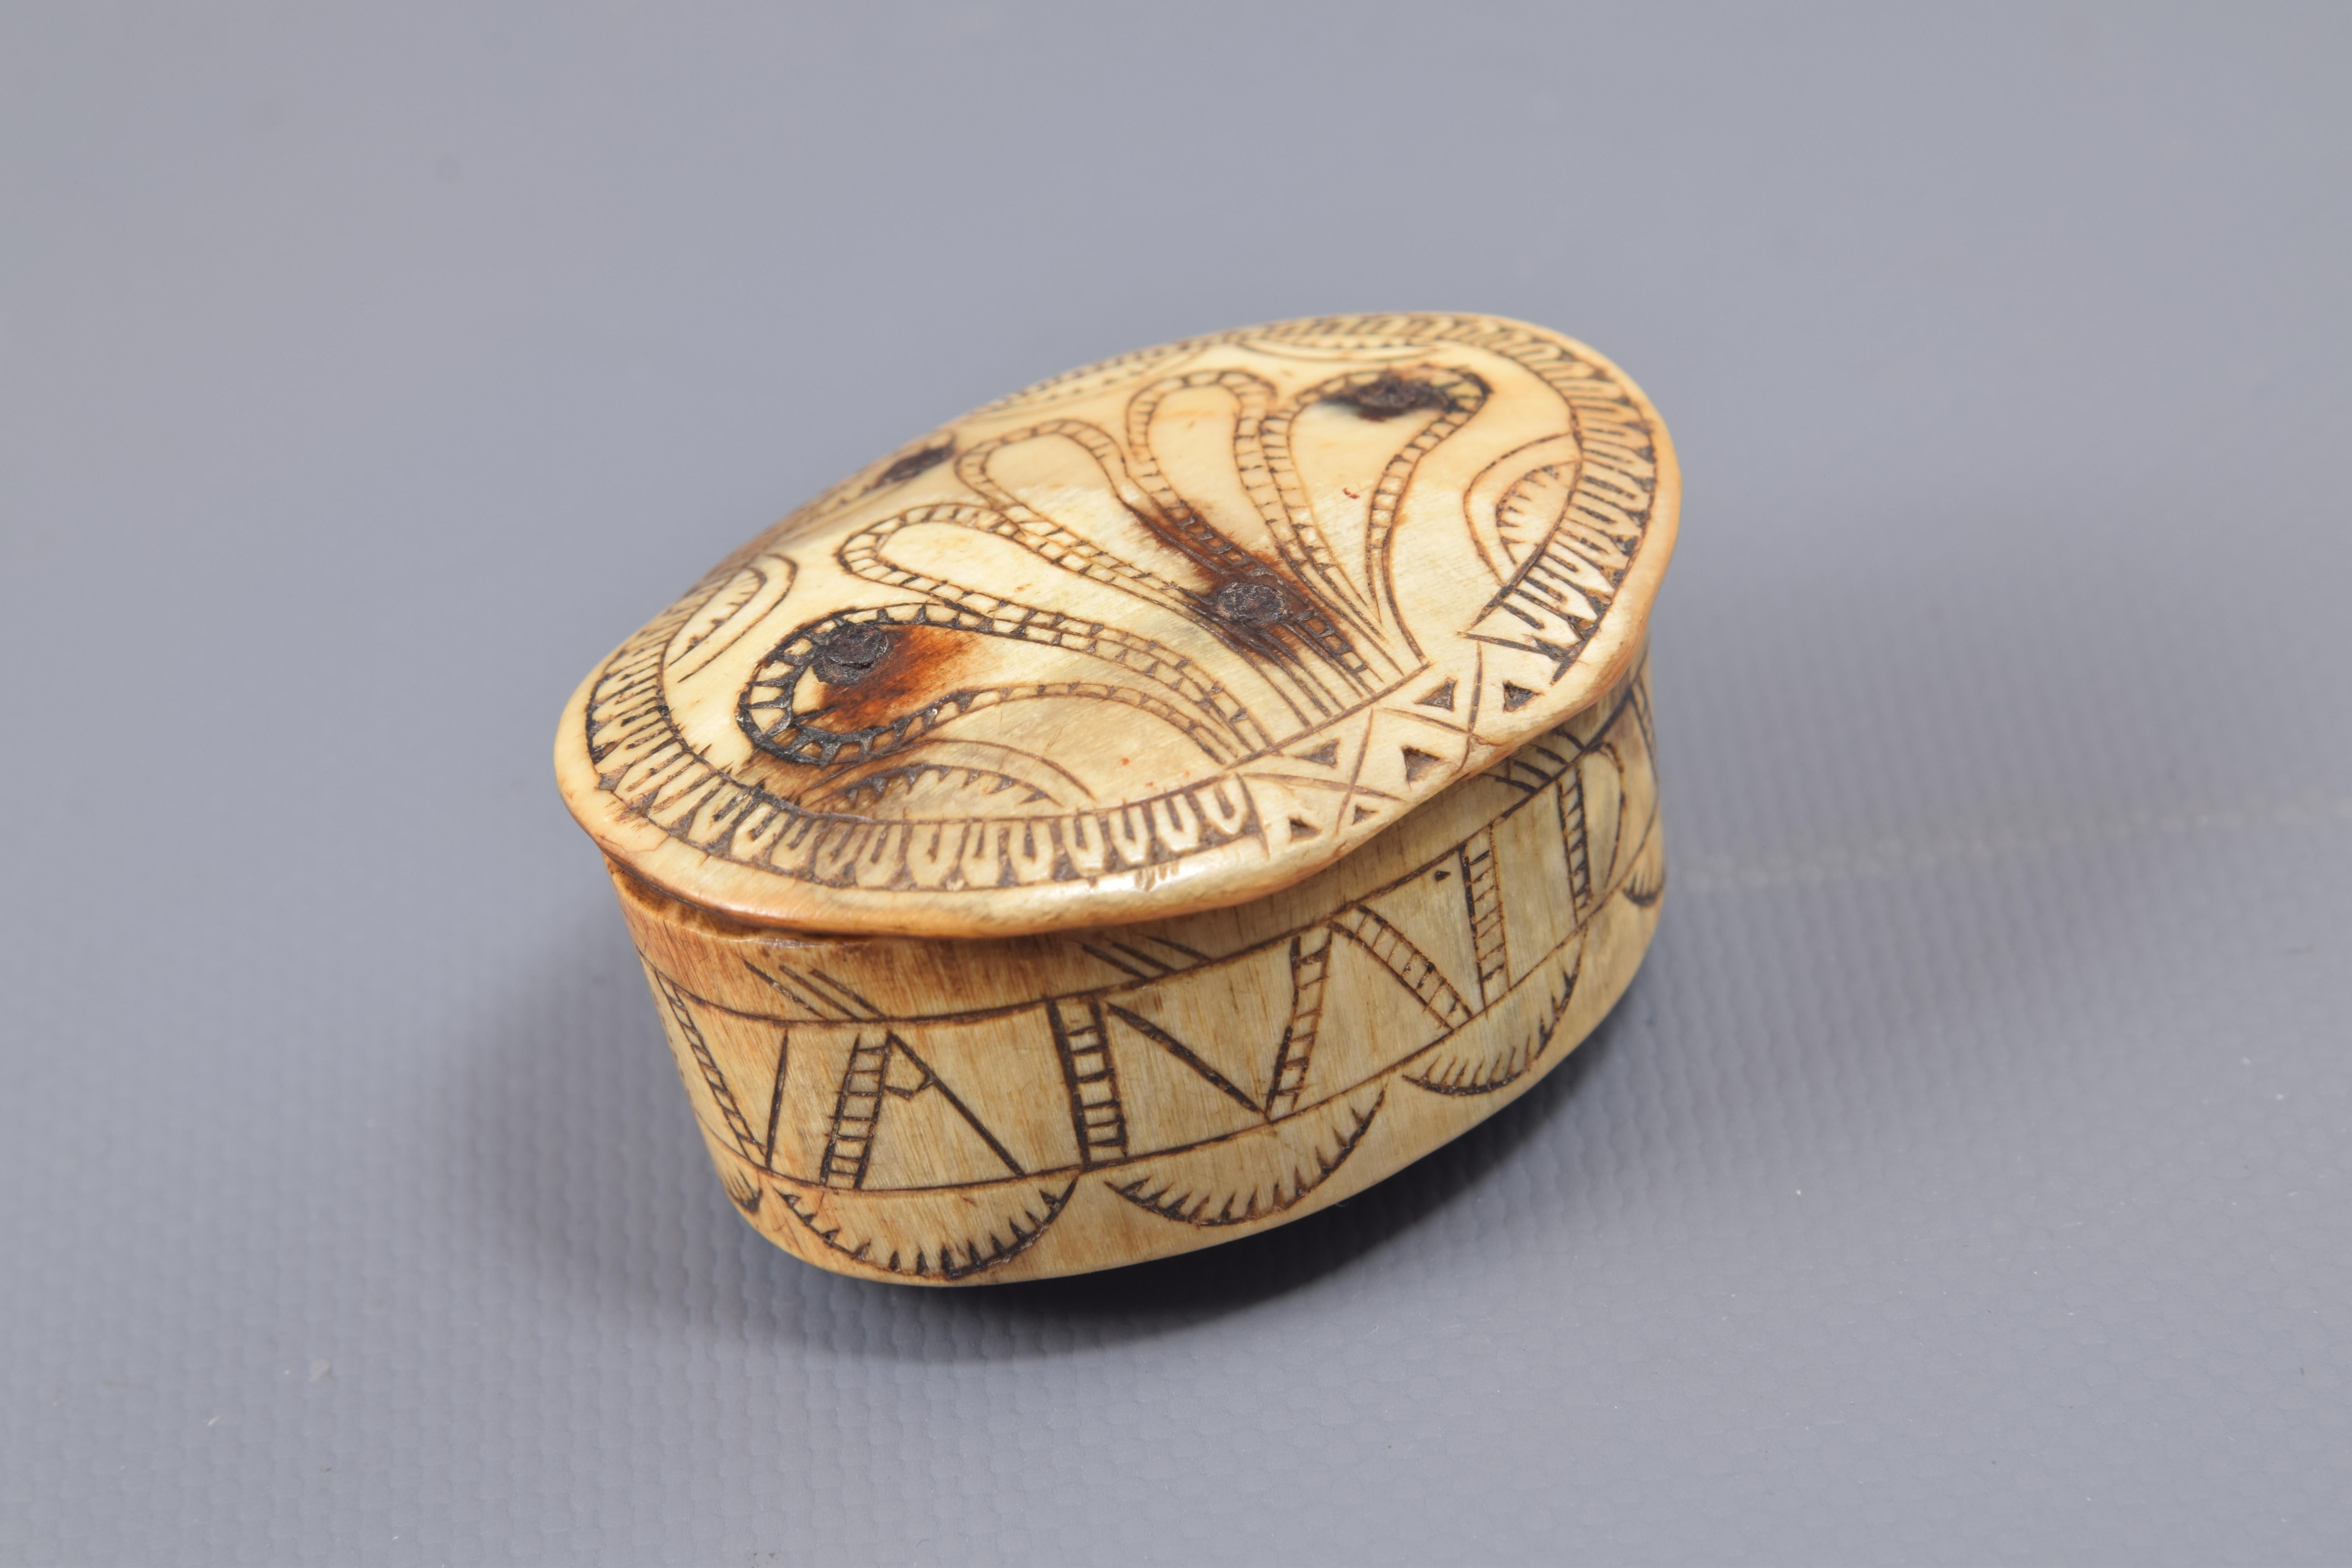 Pastoral box. Asta, metal. Spain, 18th century.
Small oval-shaped box made of carved and engraved flagpole, with metal hinged lid, decorated to the outside with a simple composition based on simplified plant elements and an inscription on the front